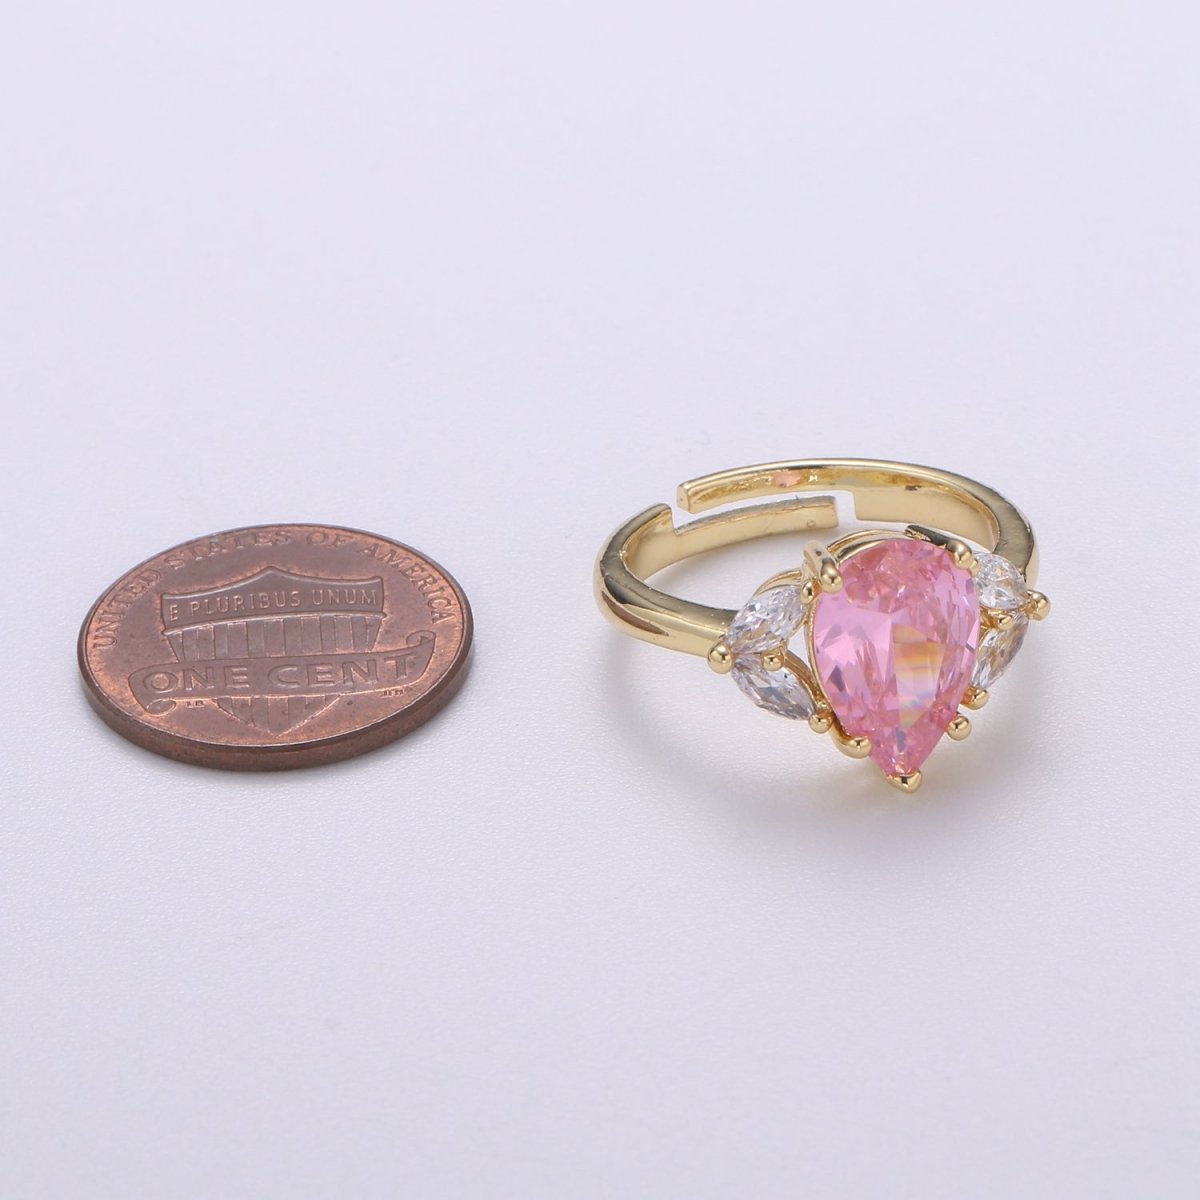 Vintage Teardrop Pink Ring- Adjustable Gold Ring- Engagement Ring- Promise Ring- Pink CZ Ring- Anniversary Birthday Gift For Her O-320 - DLUXCA